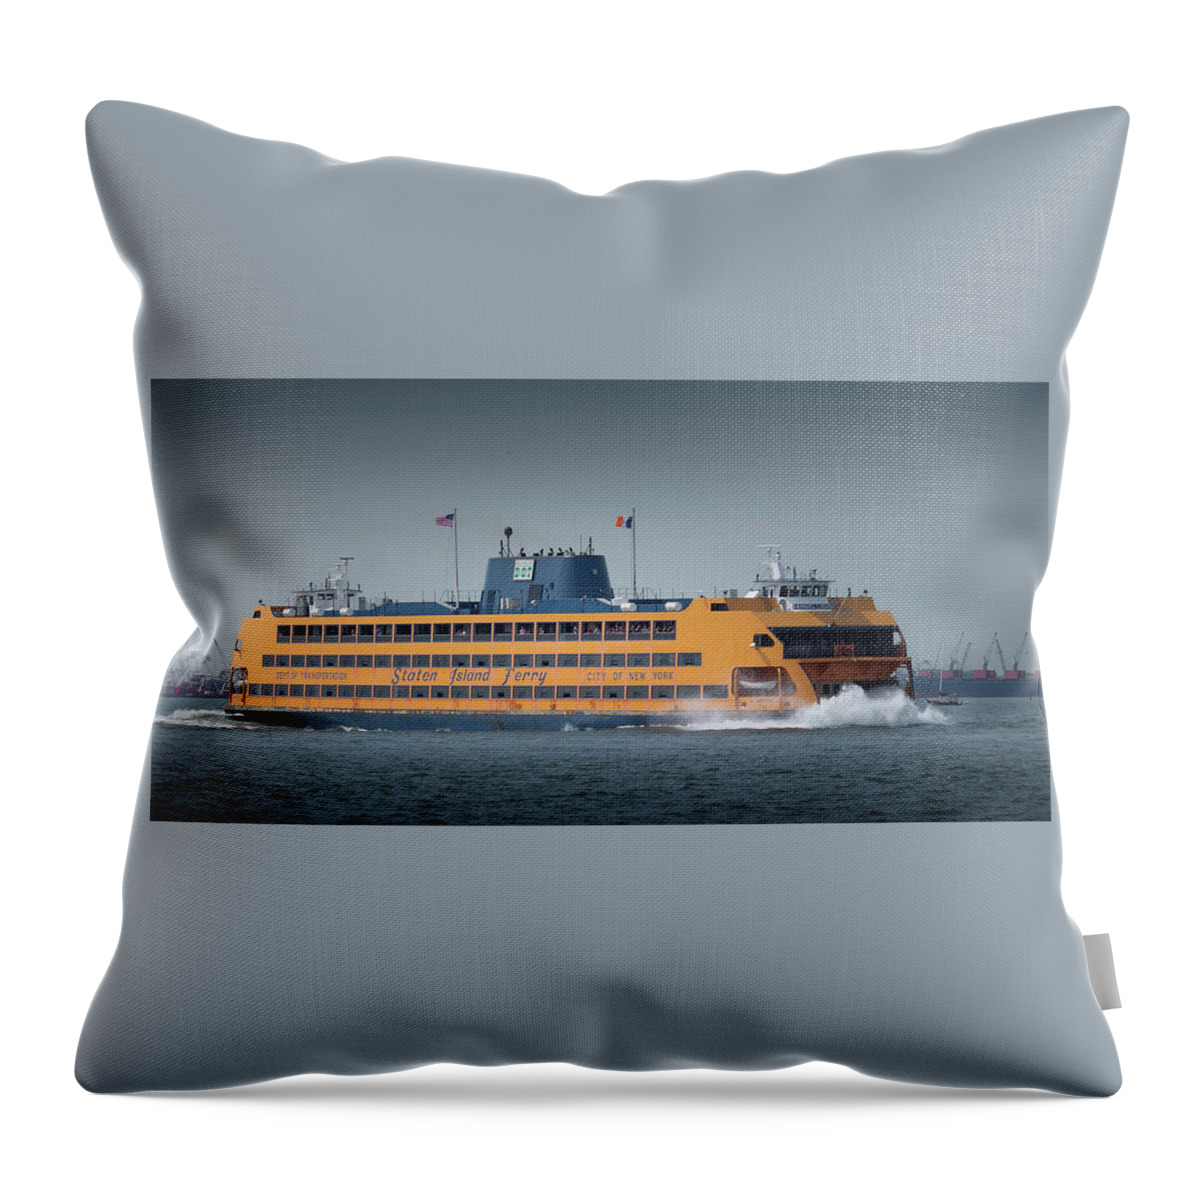 Staten Island Ferry Throw Pillow featuring the photograph Samuel I. Newhouse Ferry by Kenneth Cole